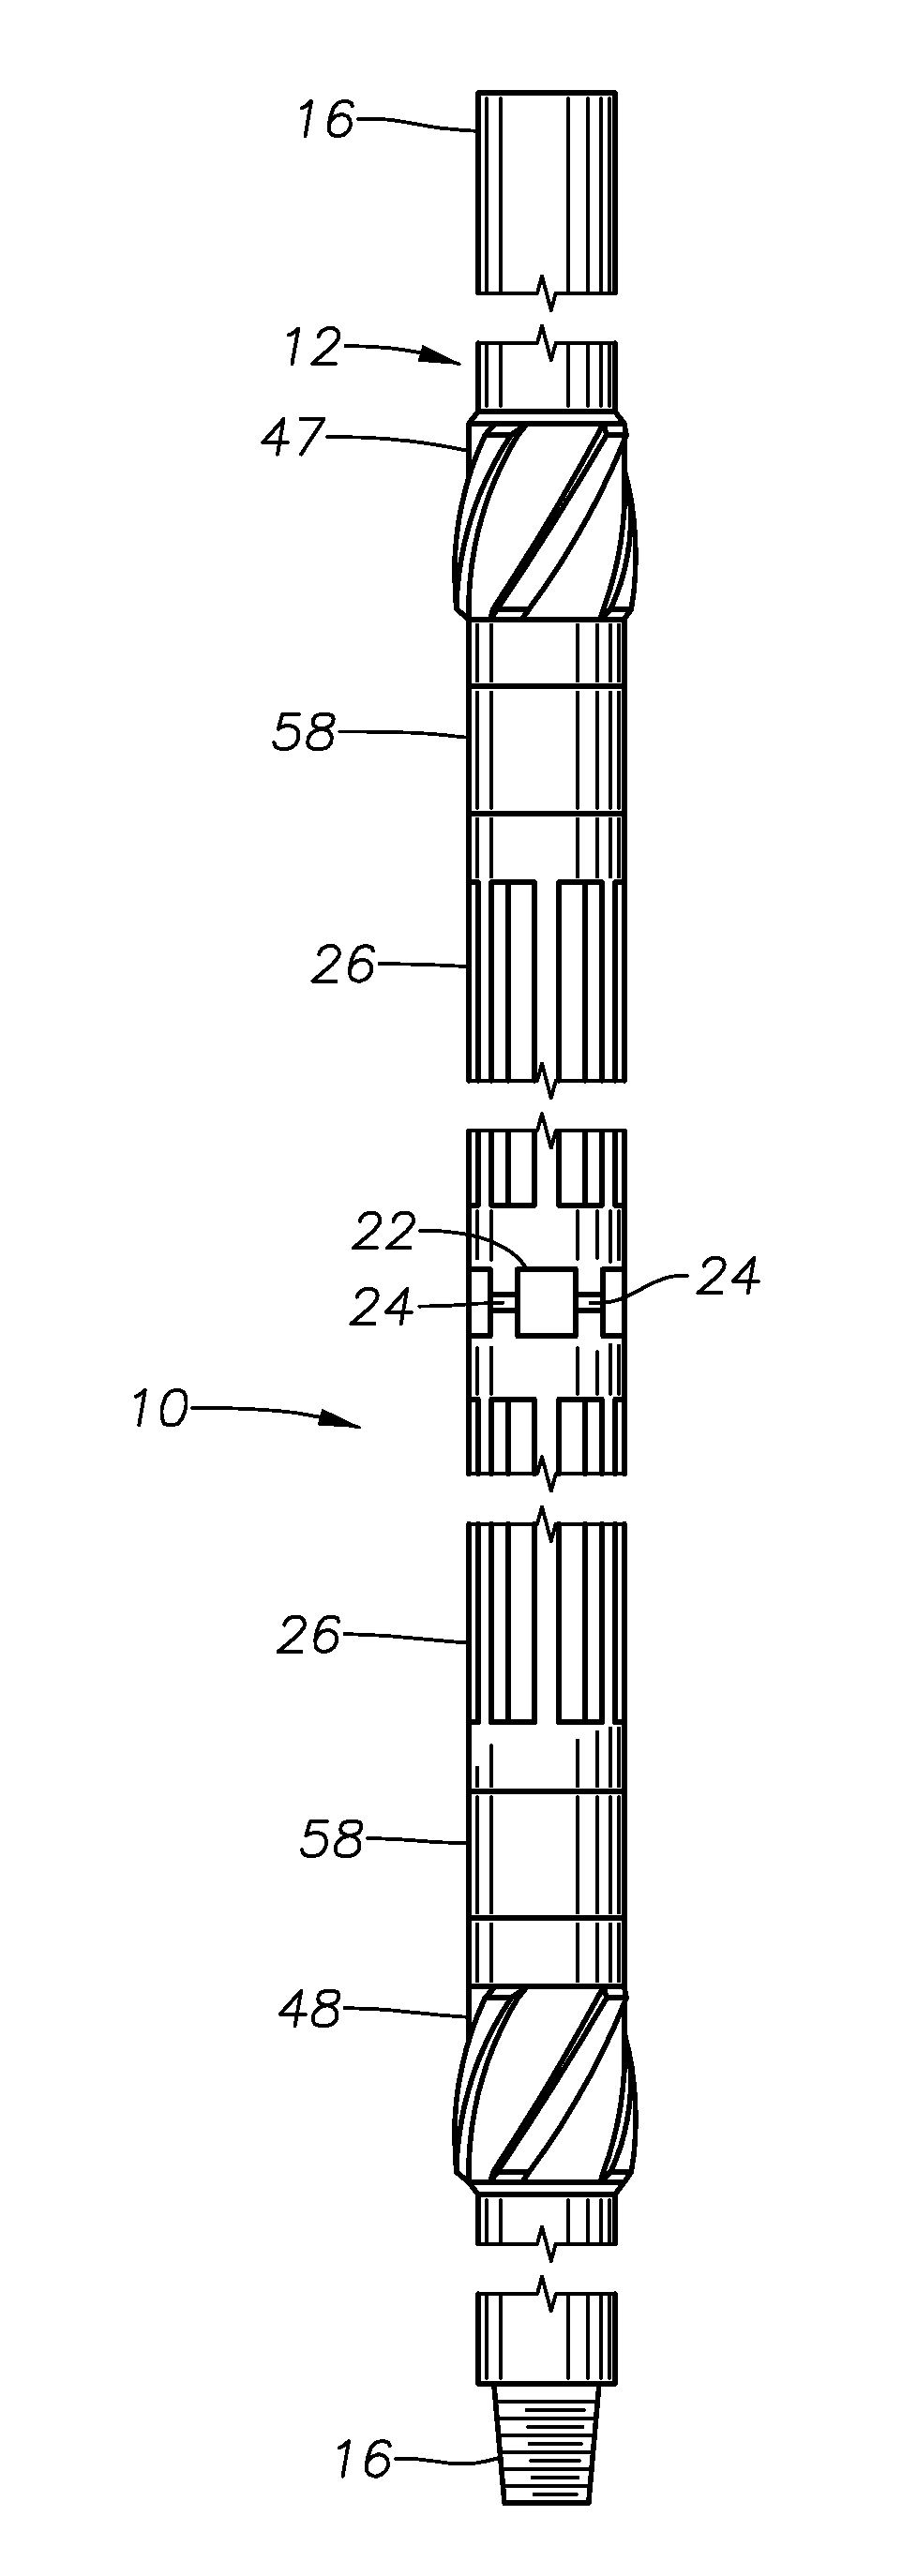 Dual-Pole Magnetic Attraction Downhole Magnetic Retrieval Apparatus